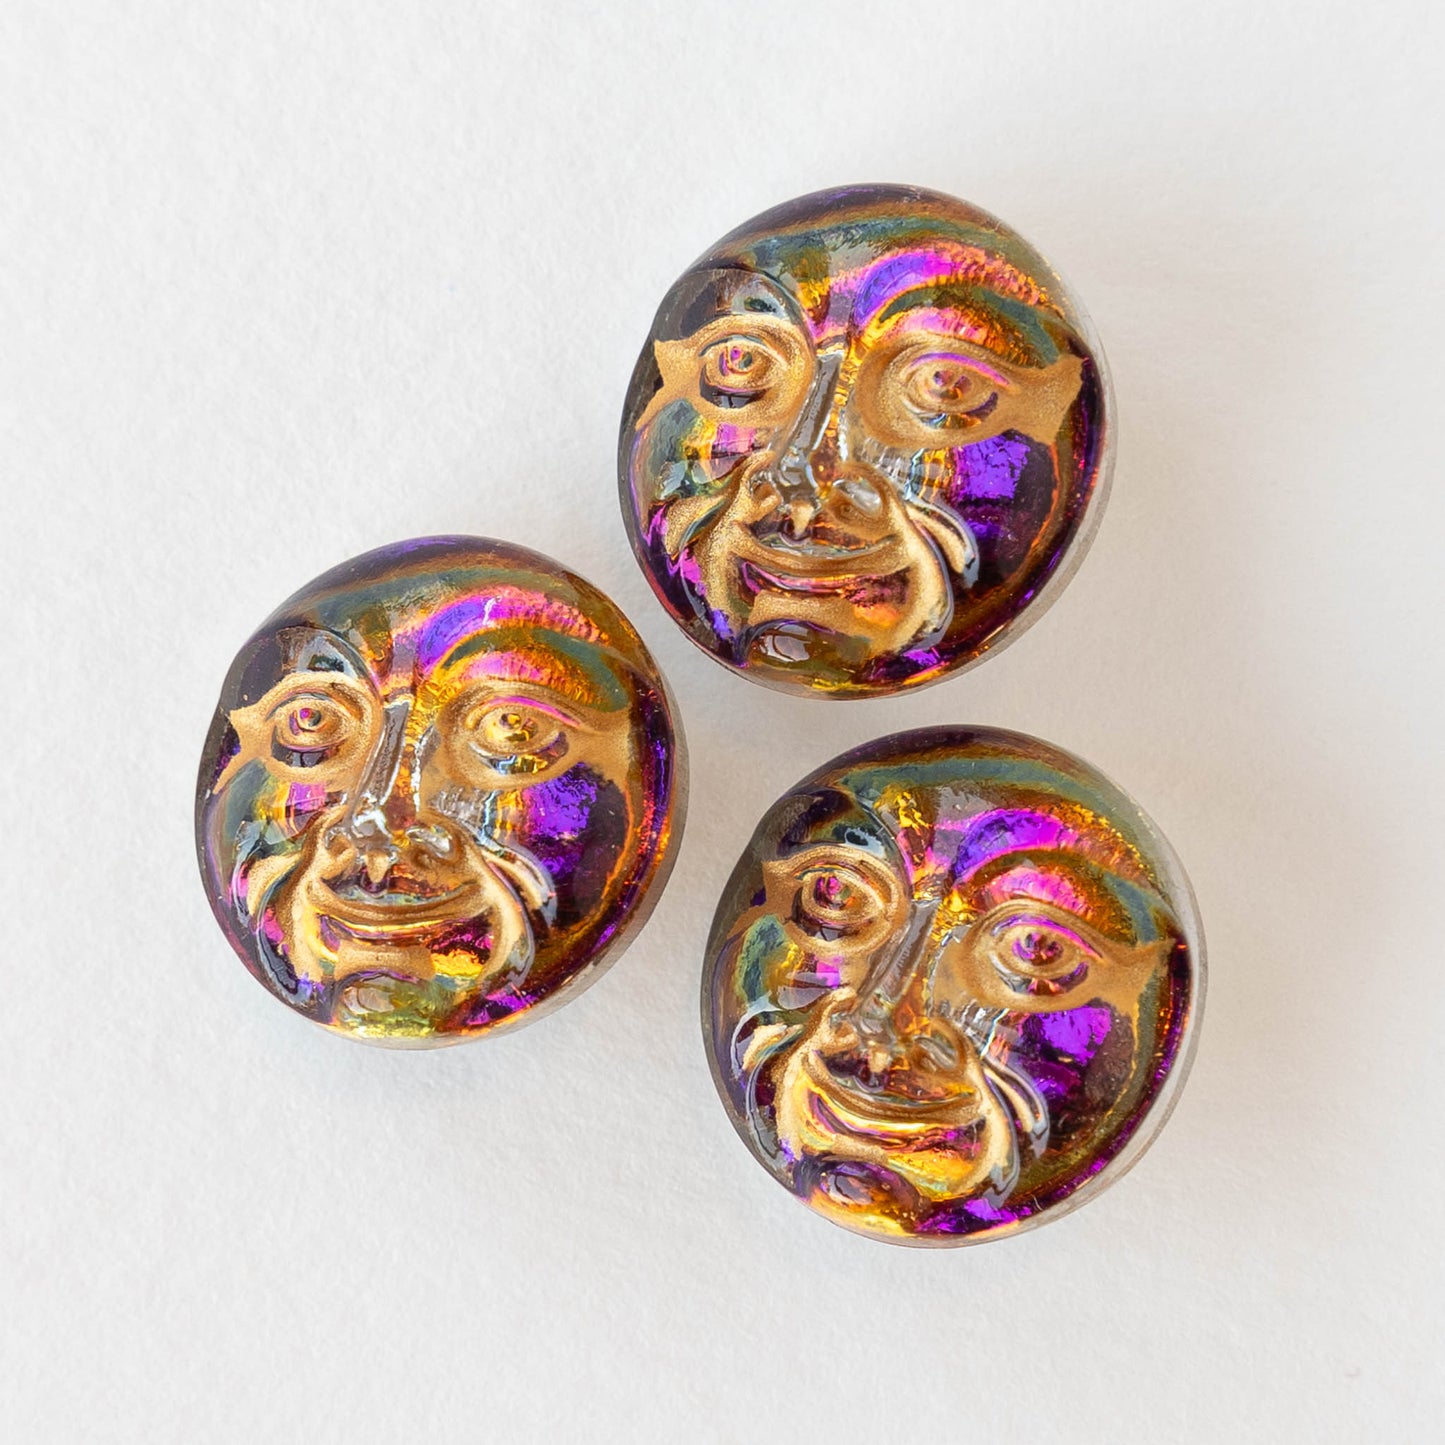 18mm Moon Face Buttons -  Purple Orange Iridescent with Gold Wash - 1 Button